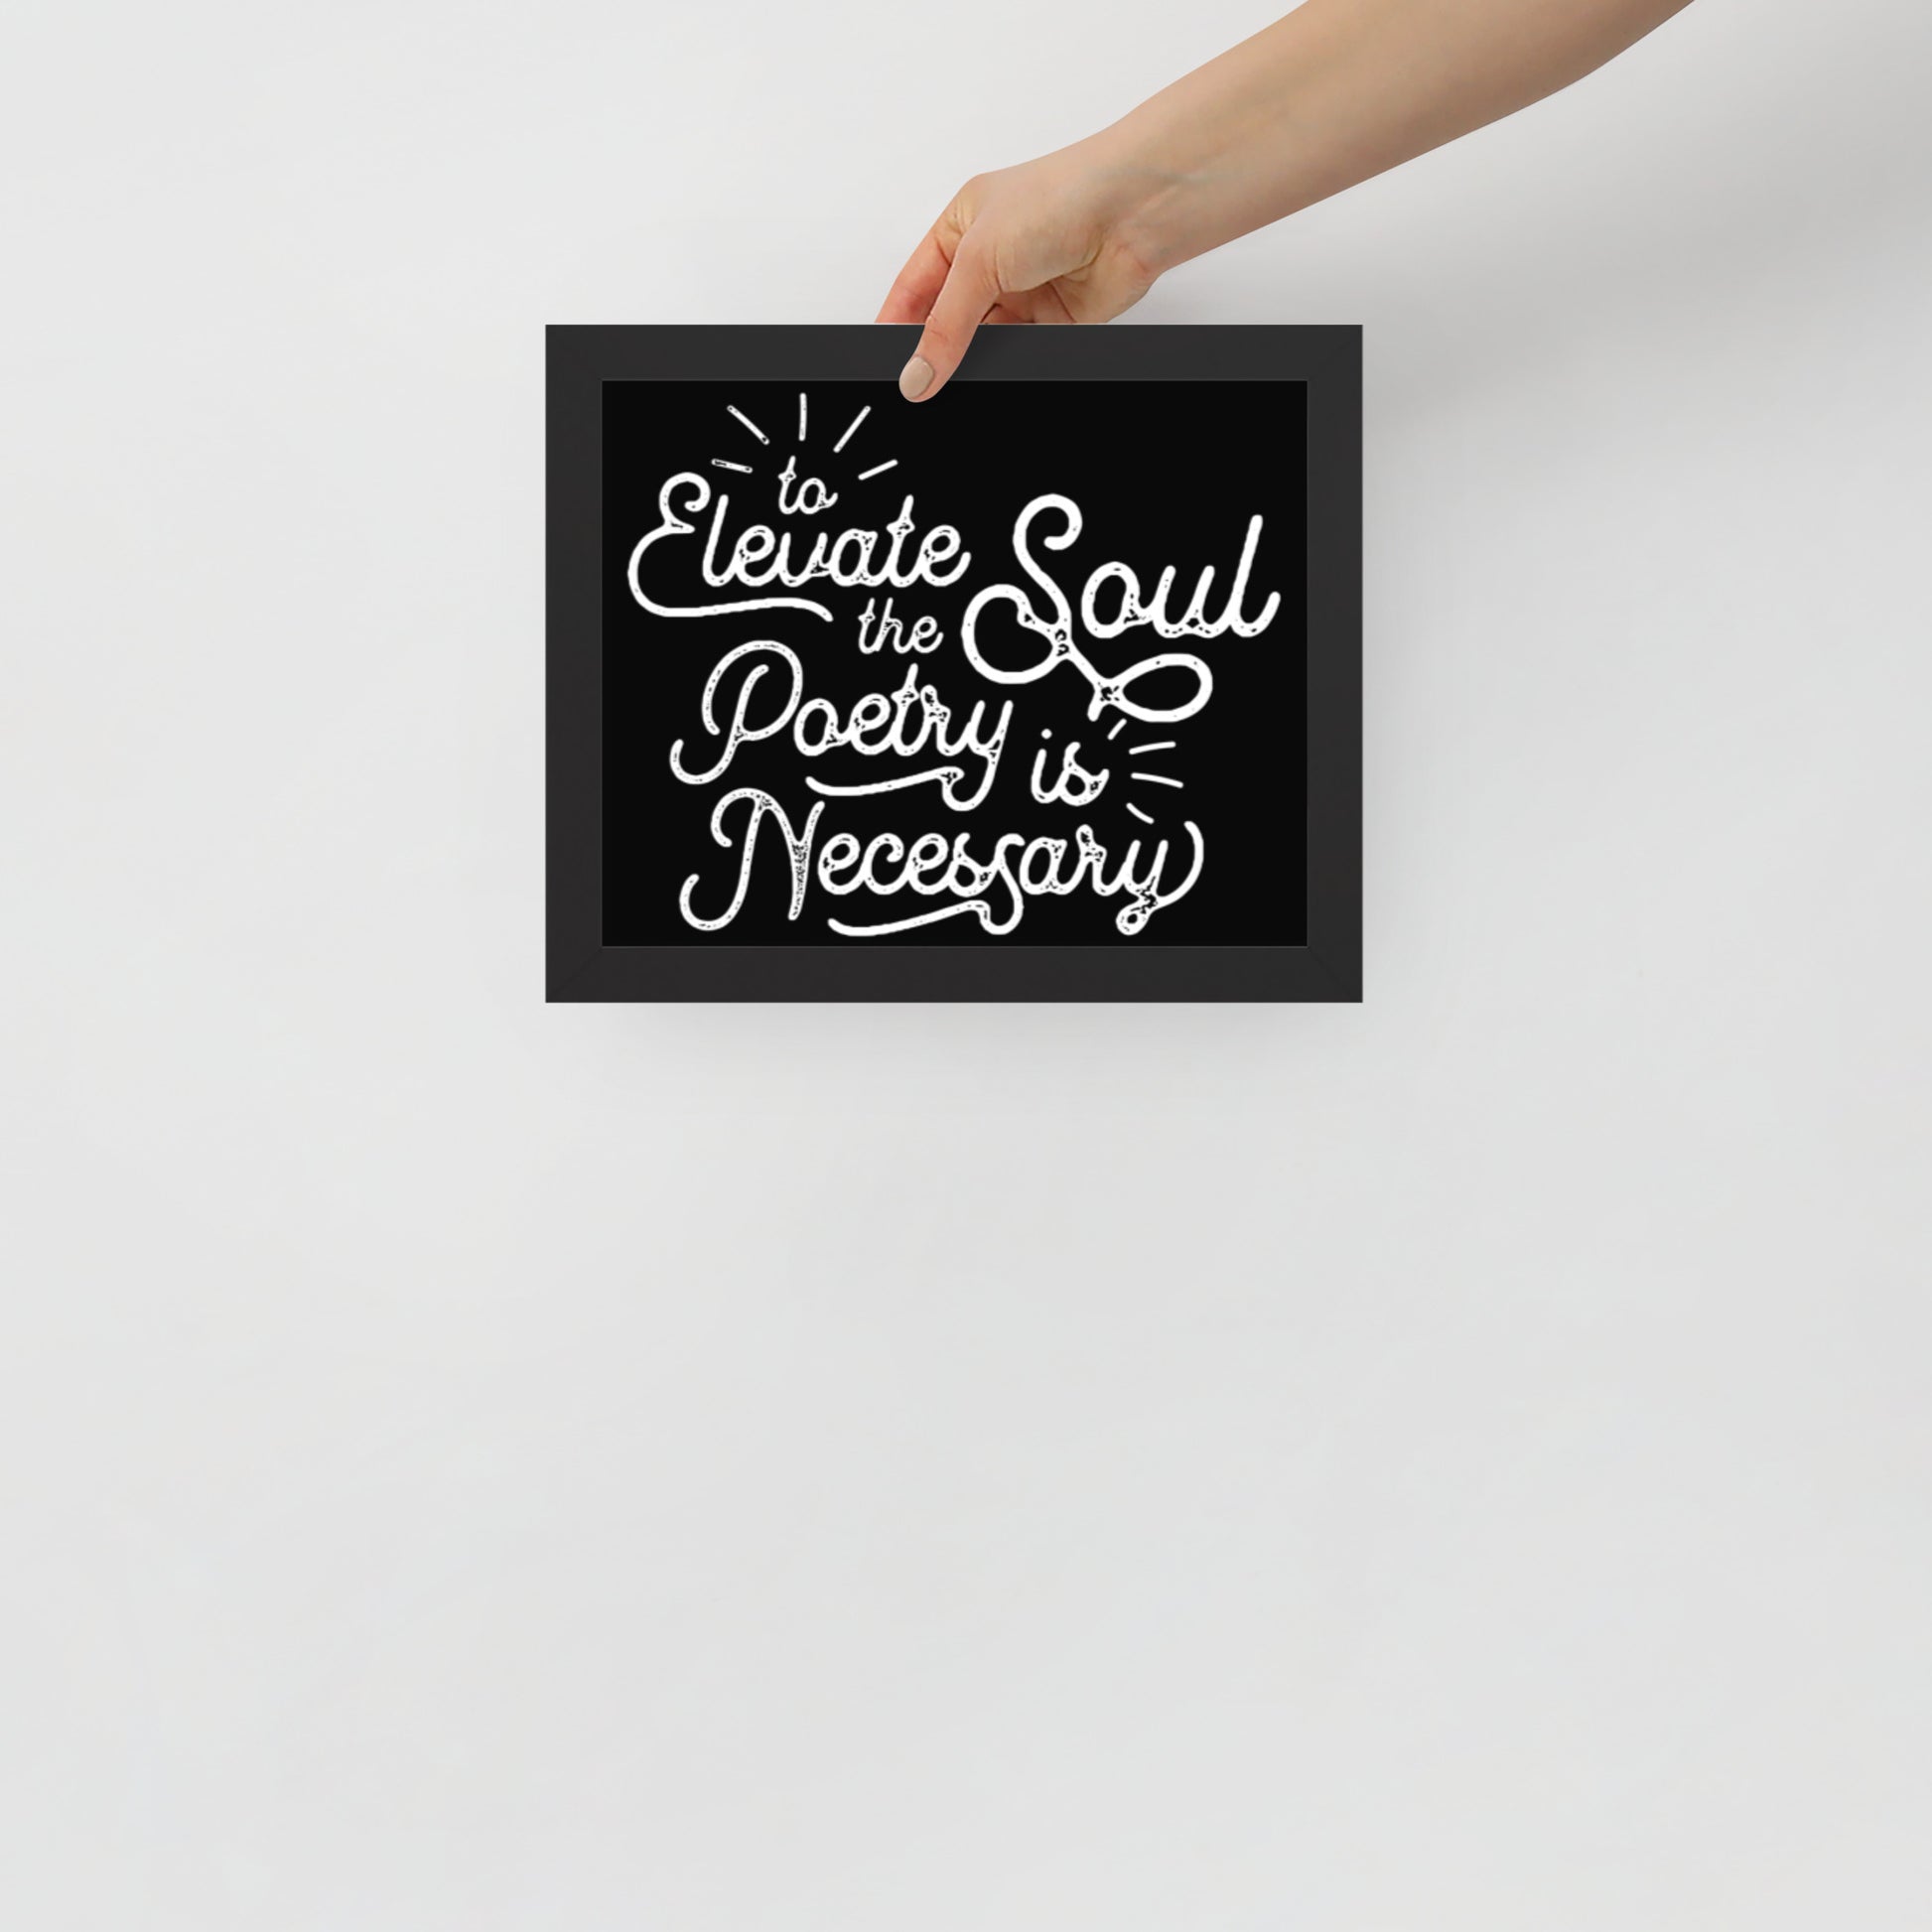 To Elevate the Soul Poetry is Necessary Framed Poster - 8 x 10 Black Frame